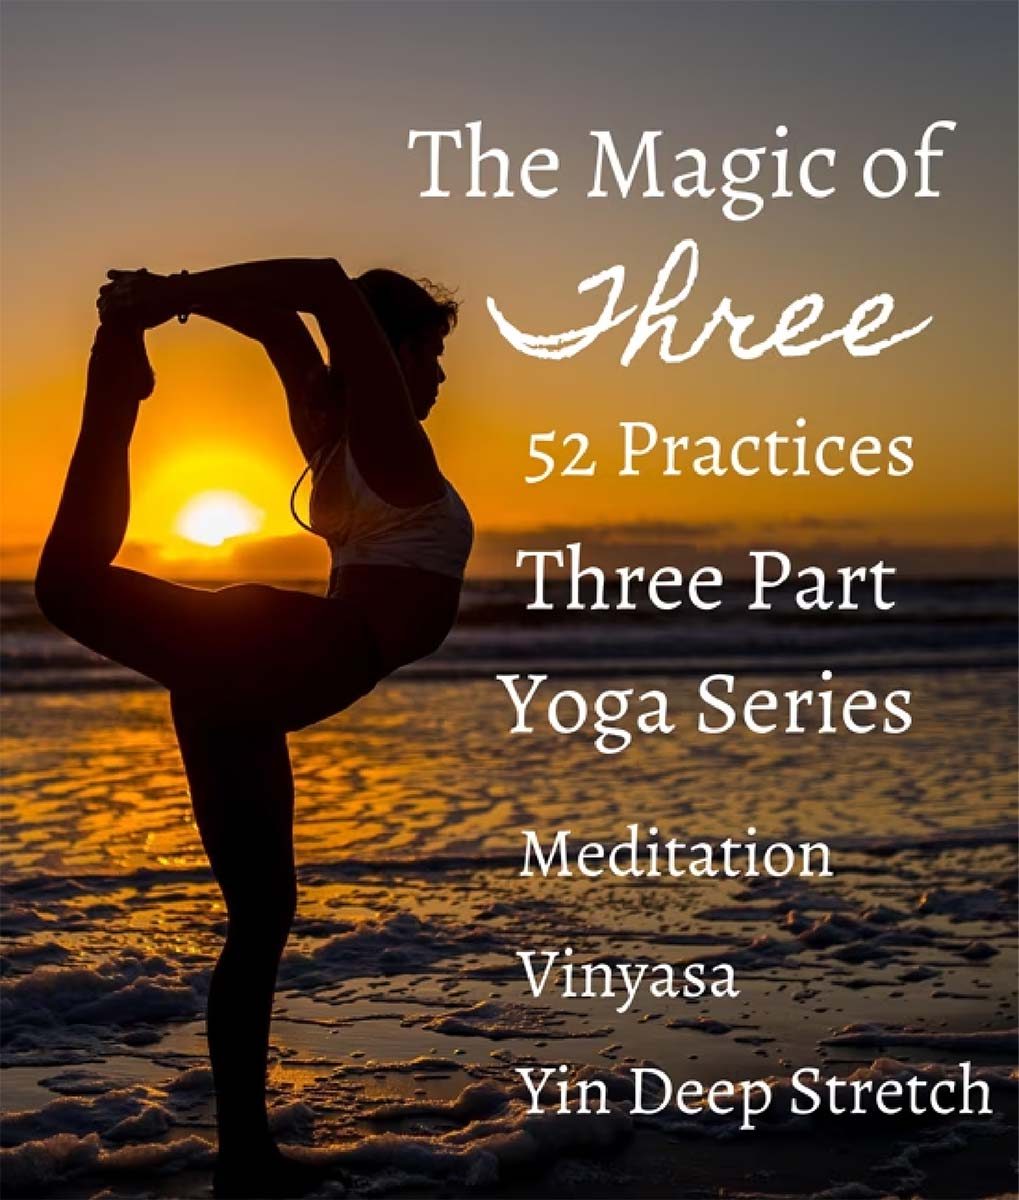 The magic of three, 52 practices. Three part yoga series with Veronique Ory